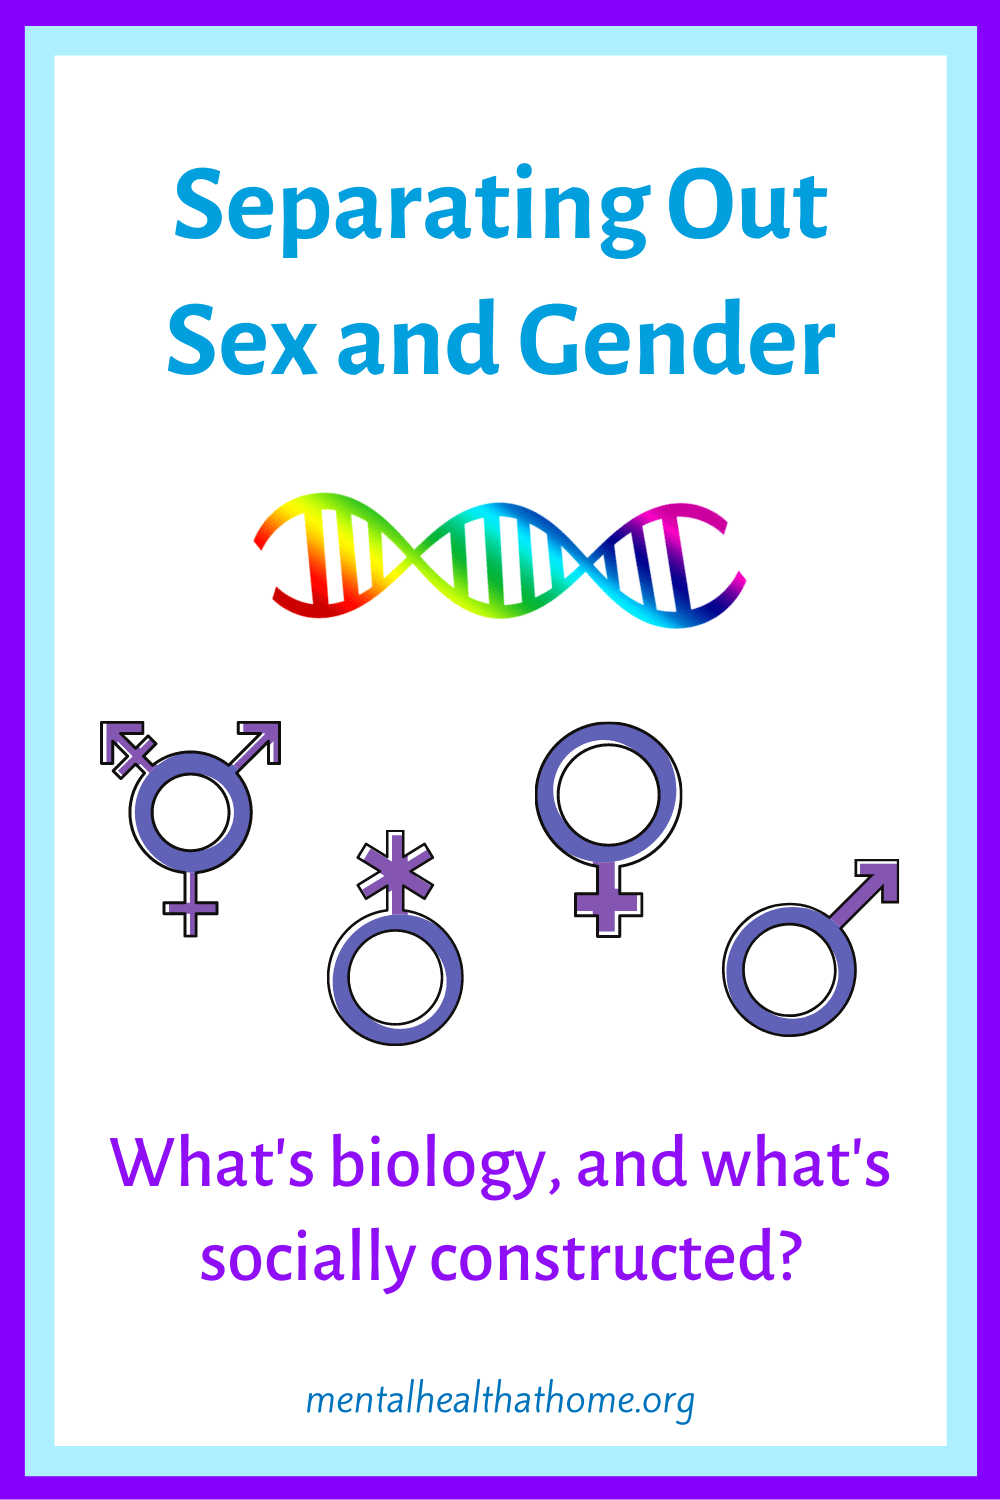 Separating Out Sex/Gender, Biology and Social Construct image